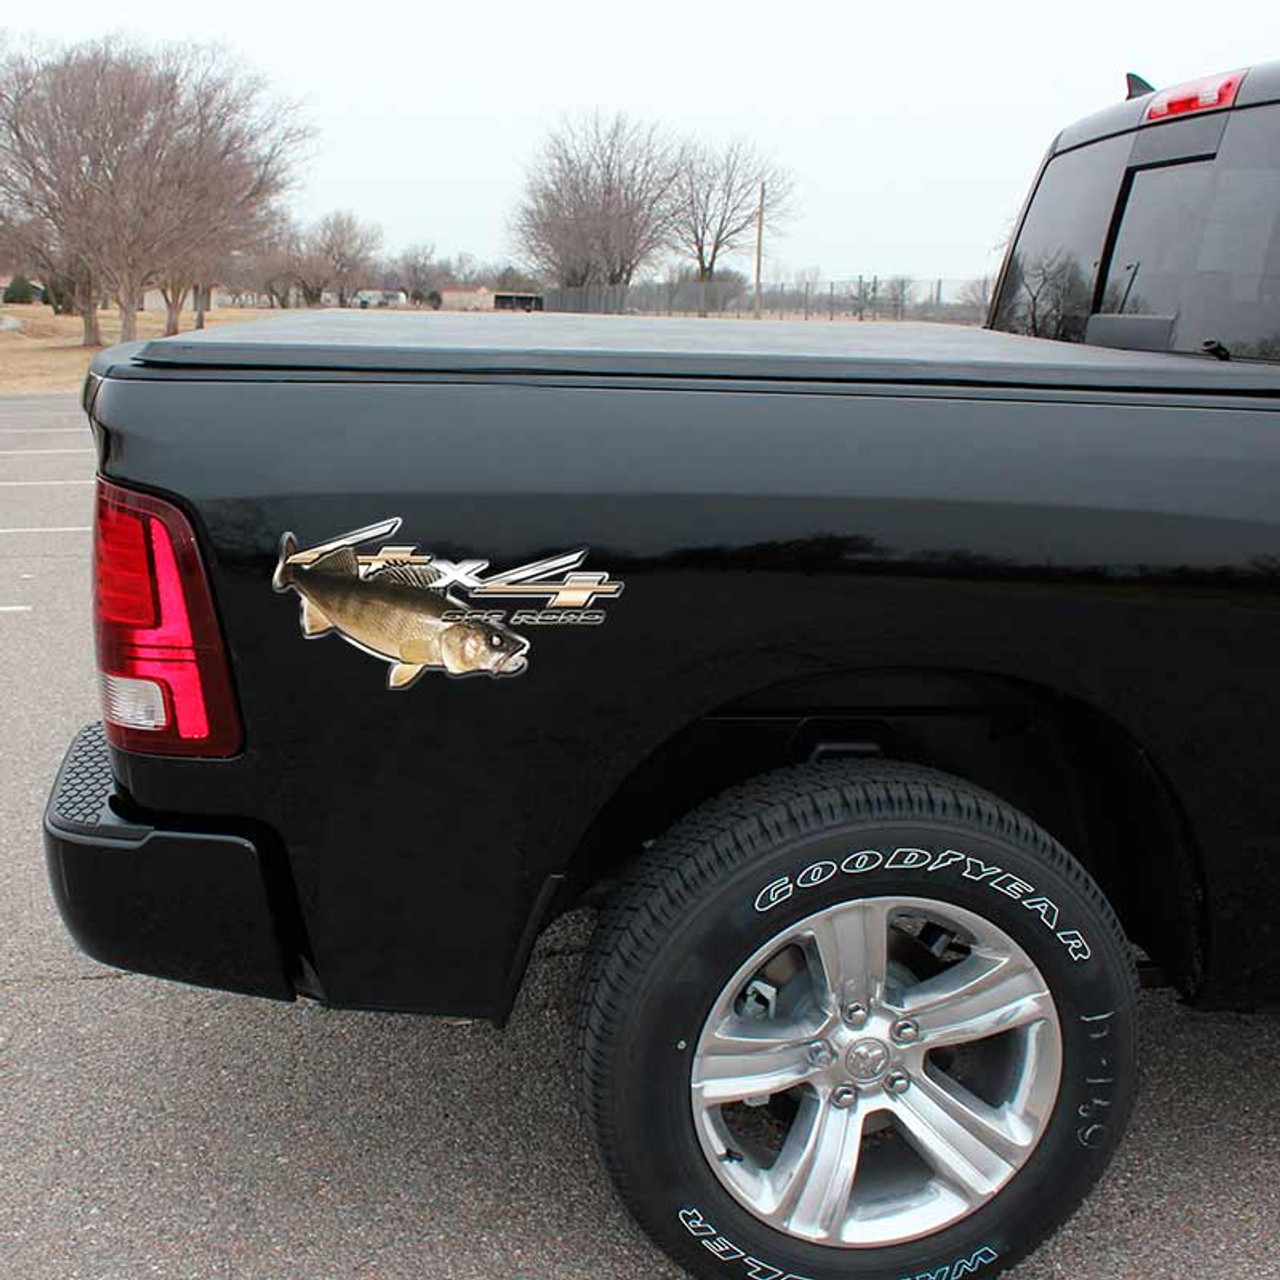 https://cdn11.bigcommerce.com/s-45cfc/images/stencil/1280x1280/products/58/5641/4x4-fishing-truck-decal-walleye-dive-truck__11557.1673409397.jpg?c=2